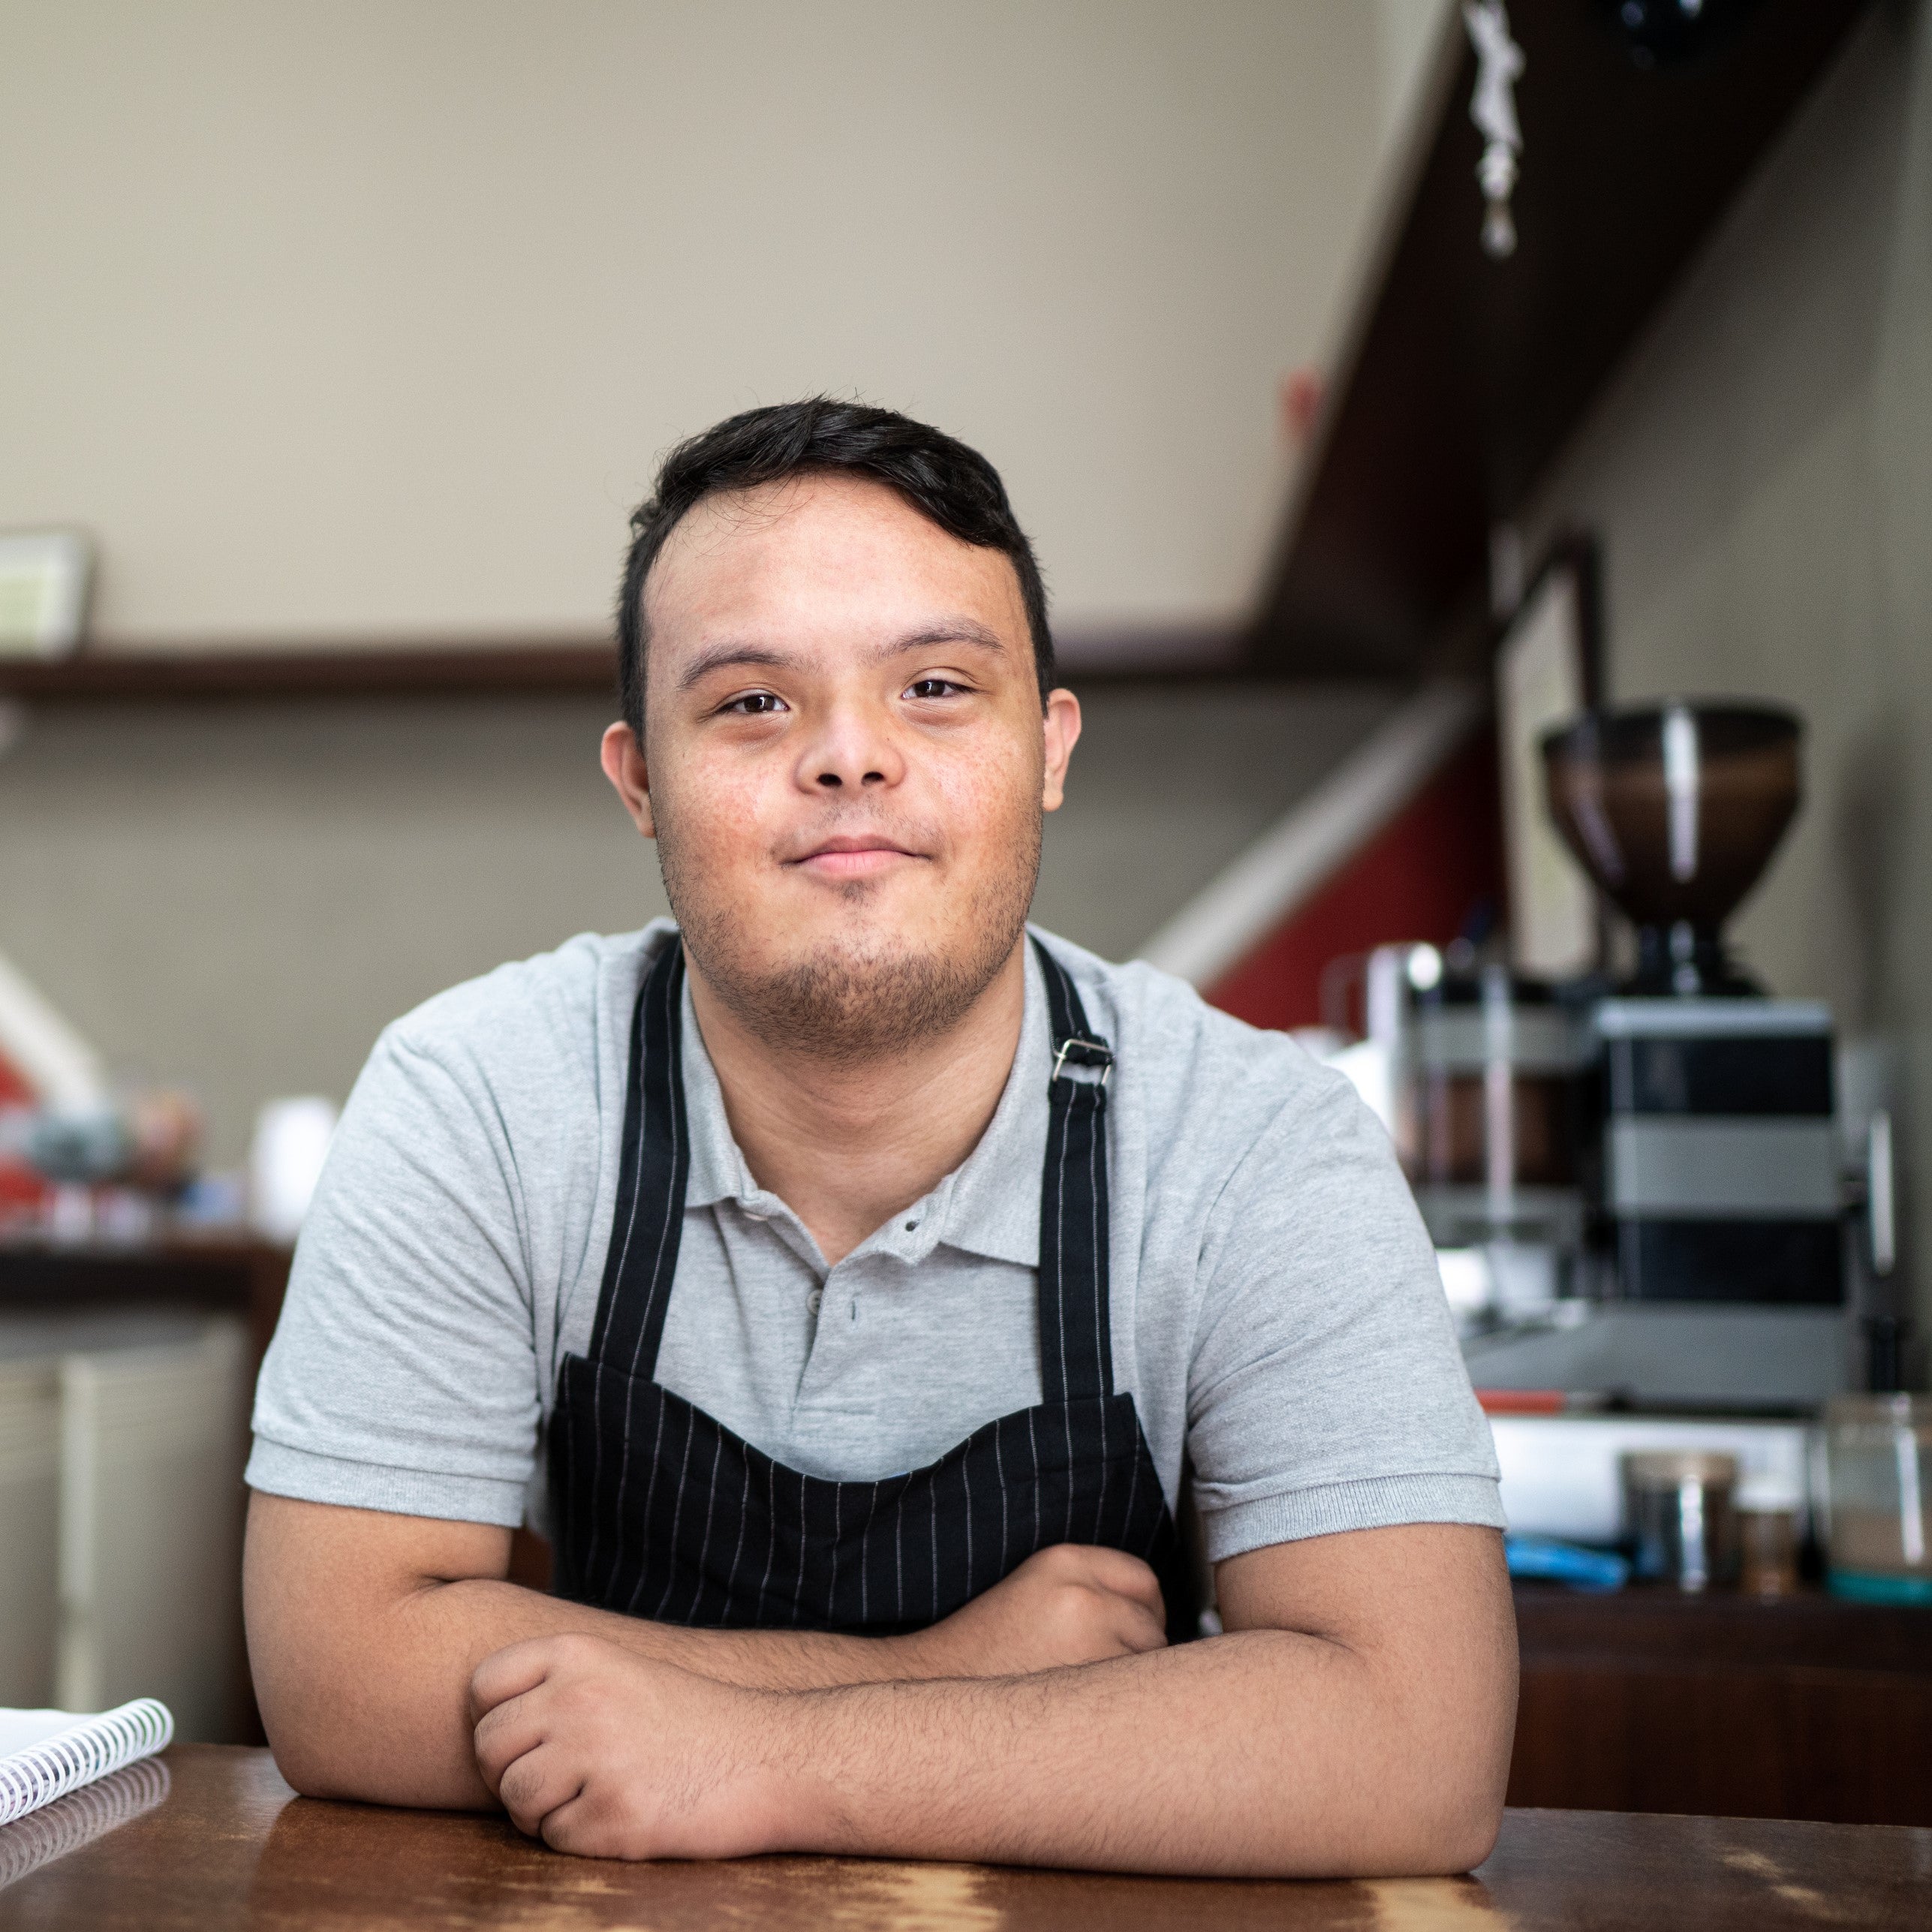 Man with Down syndrome working at a coffee shop